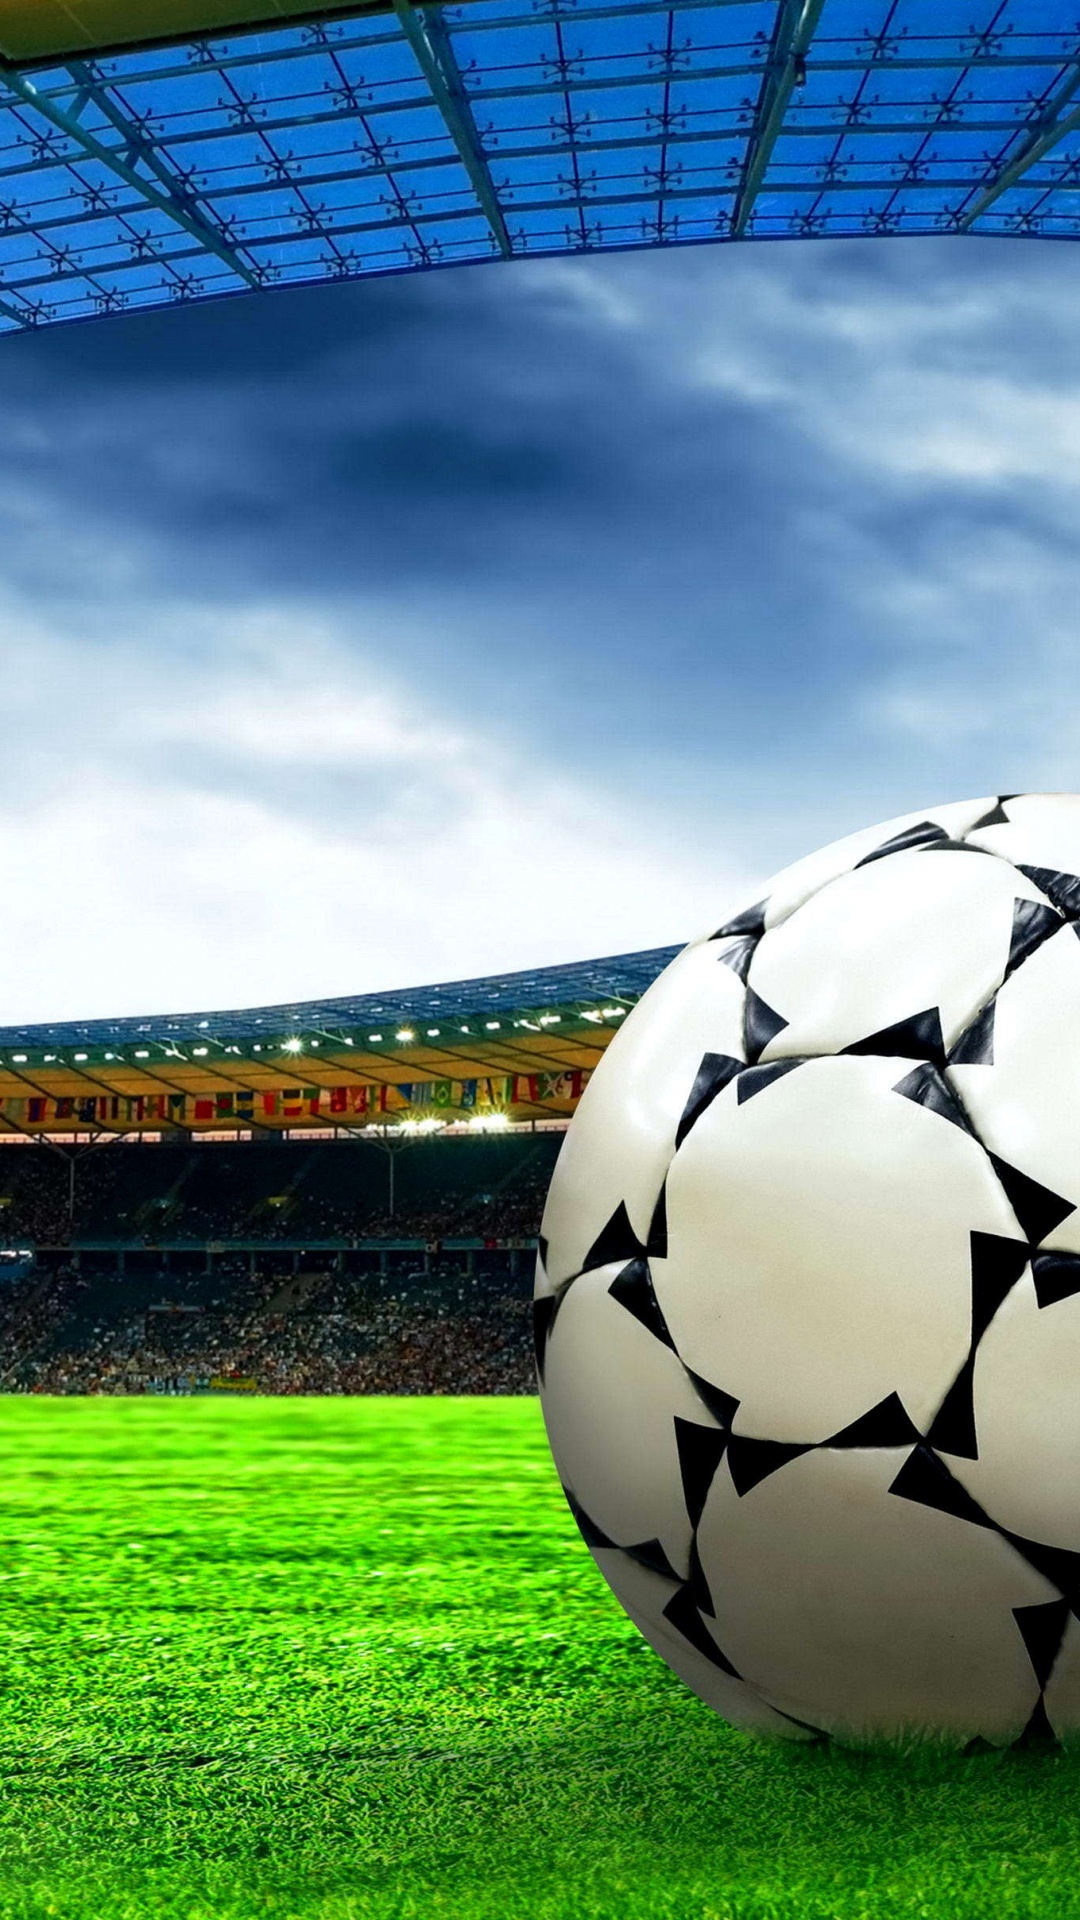 Soccer Ball on Green Grass Field Under White Clouds During Daytime. Wallpaper in 1080x1920 Resolution